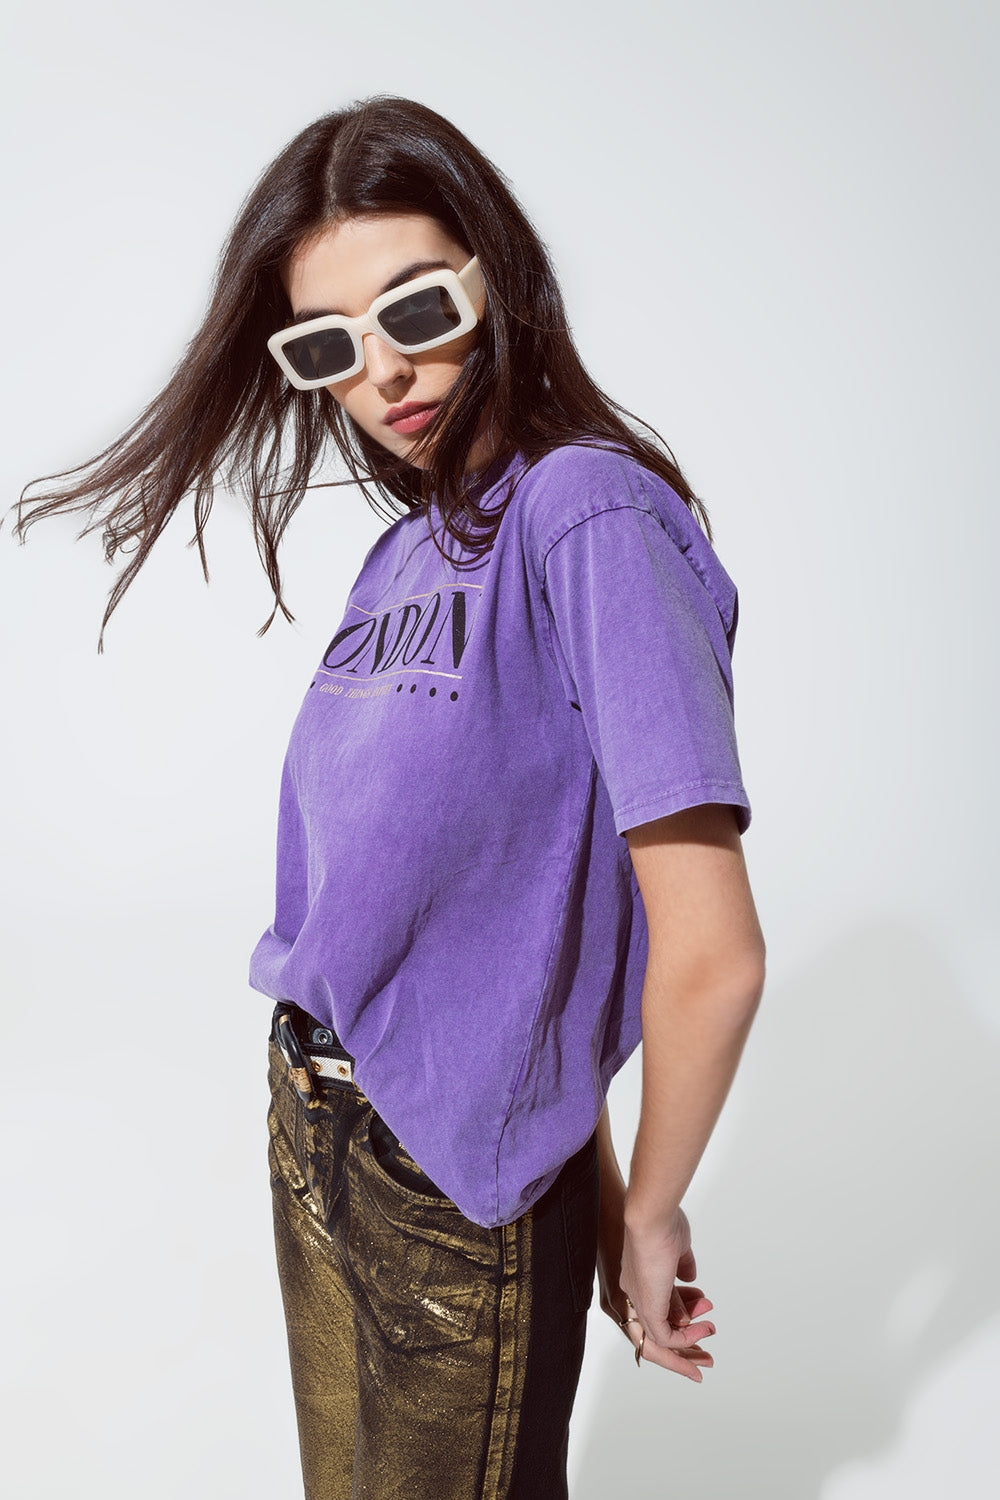 T-shirt relaxed fit in viola lavato con logo london